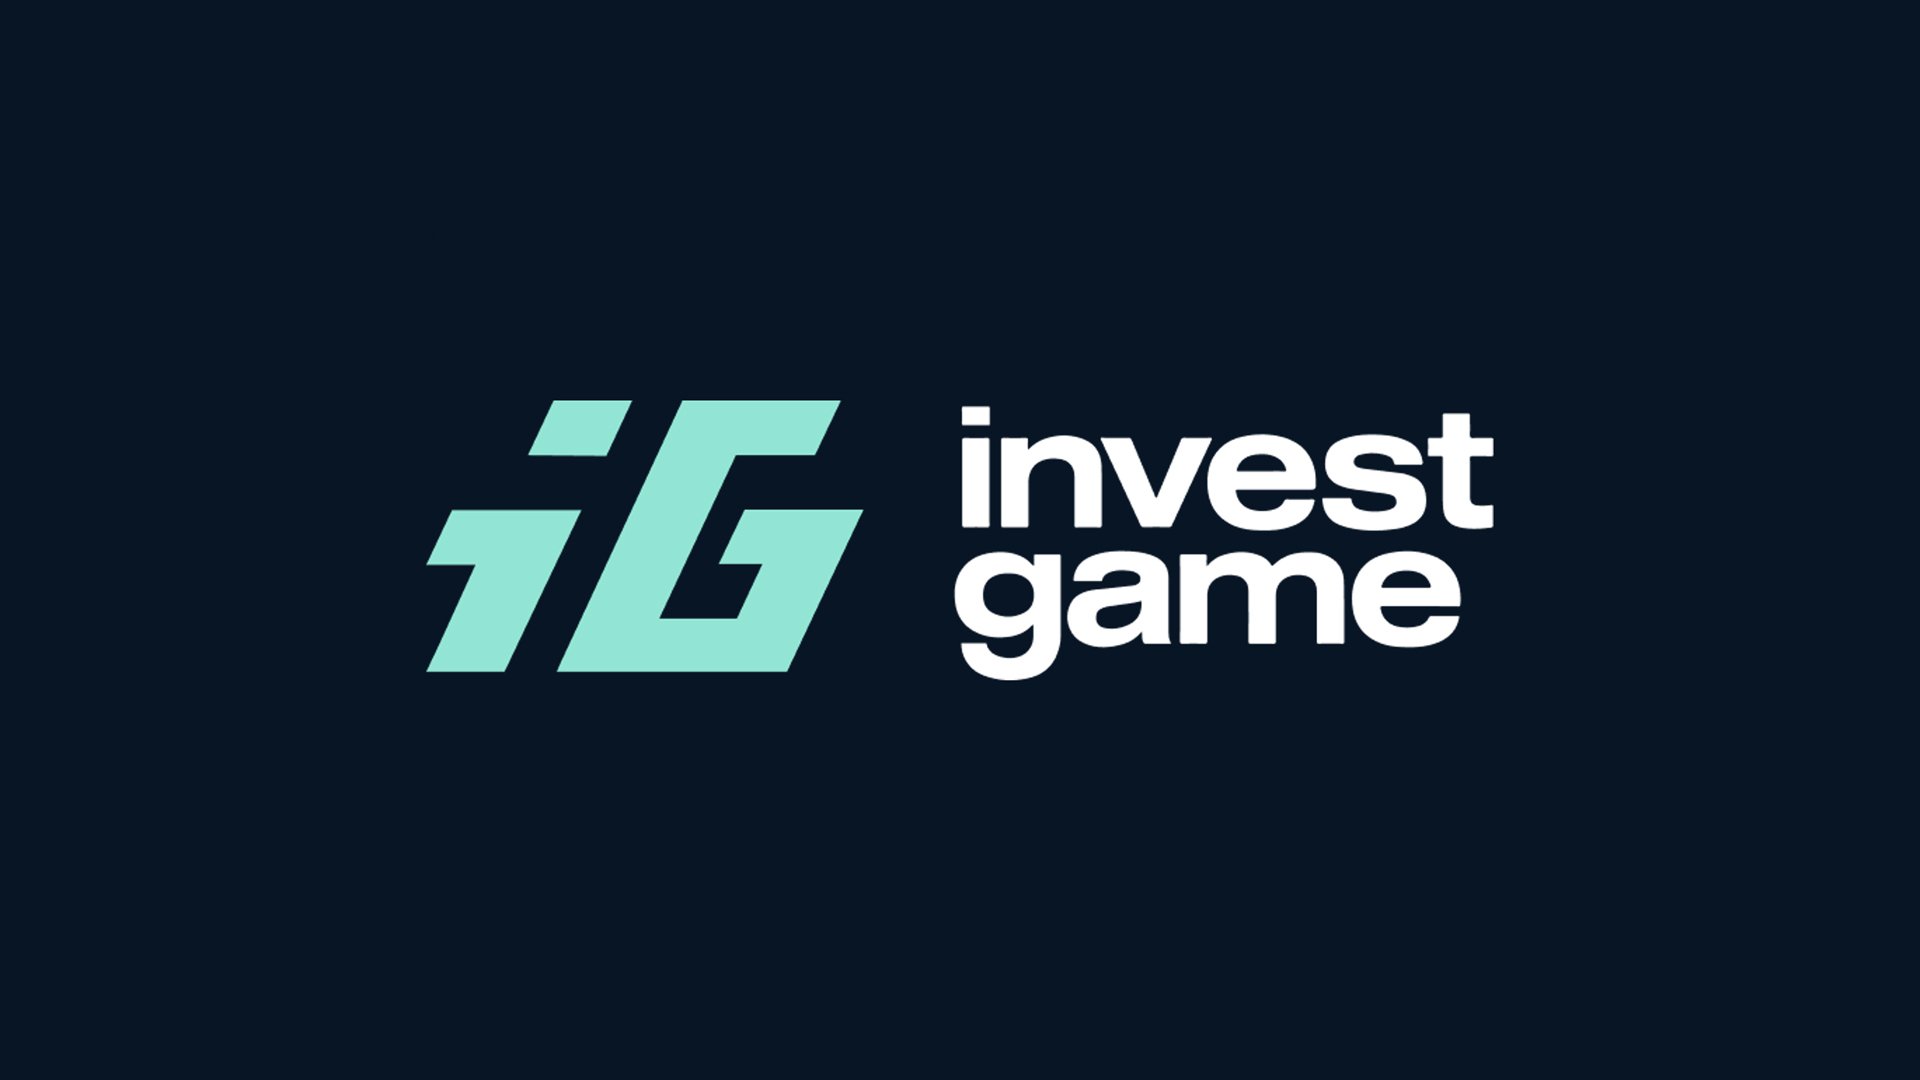 InvestGame report on gaming industry revenues in the first half of 2022